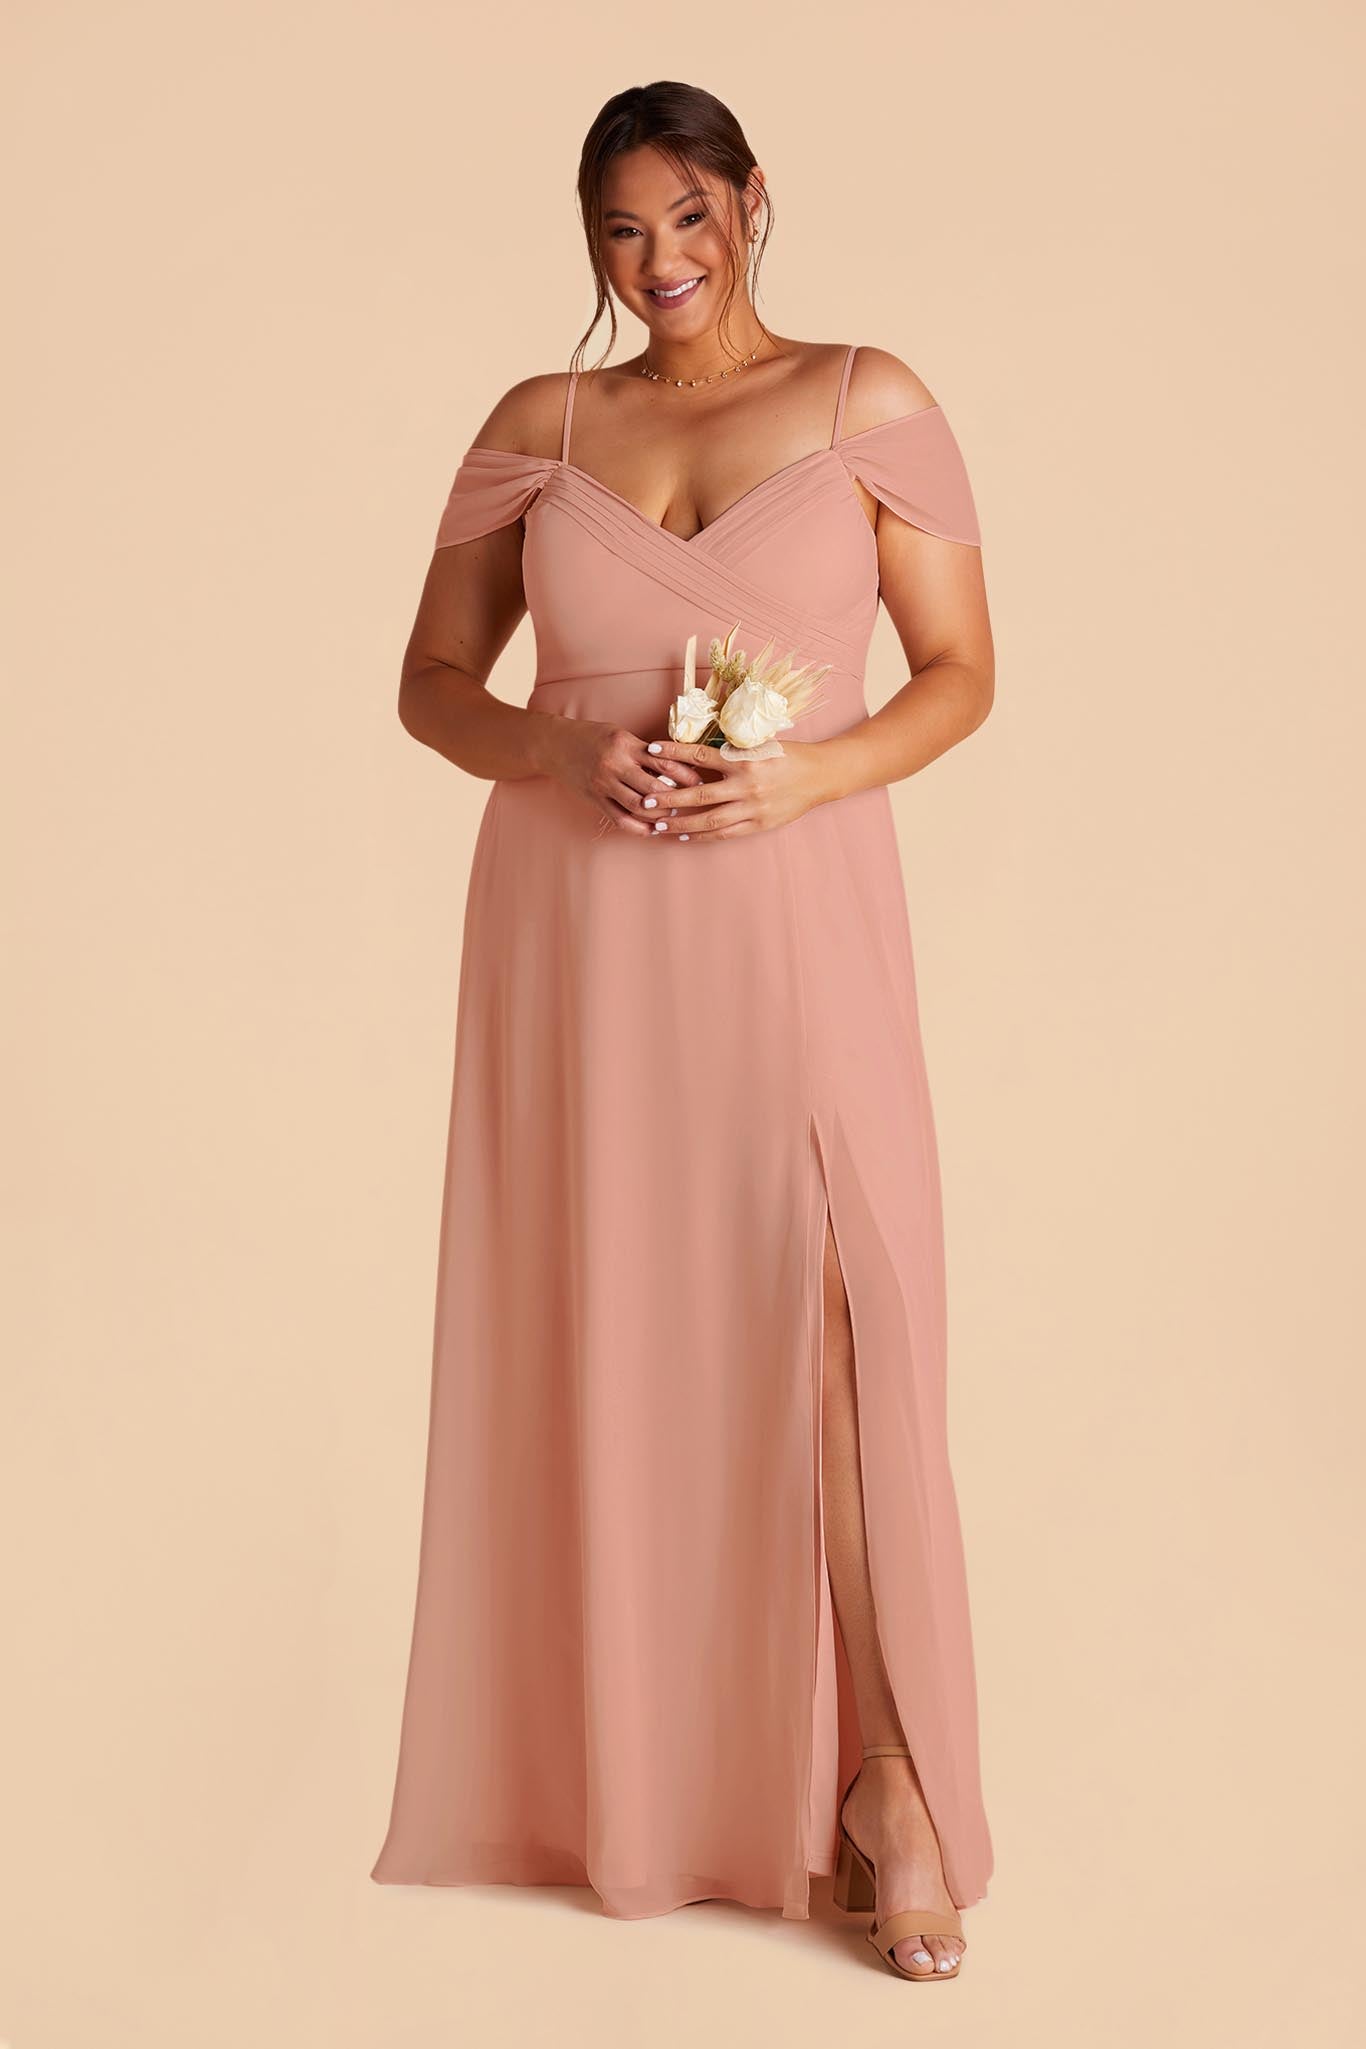 Dusty Rose Spence Convertible Dress by Birdy Grey